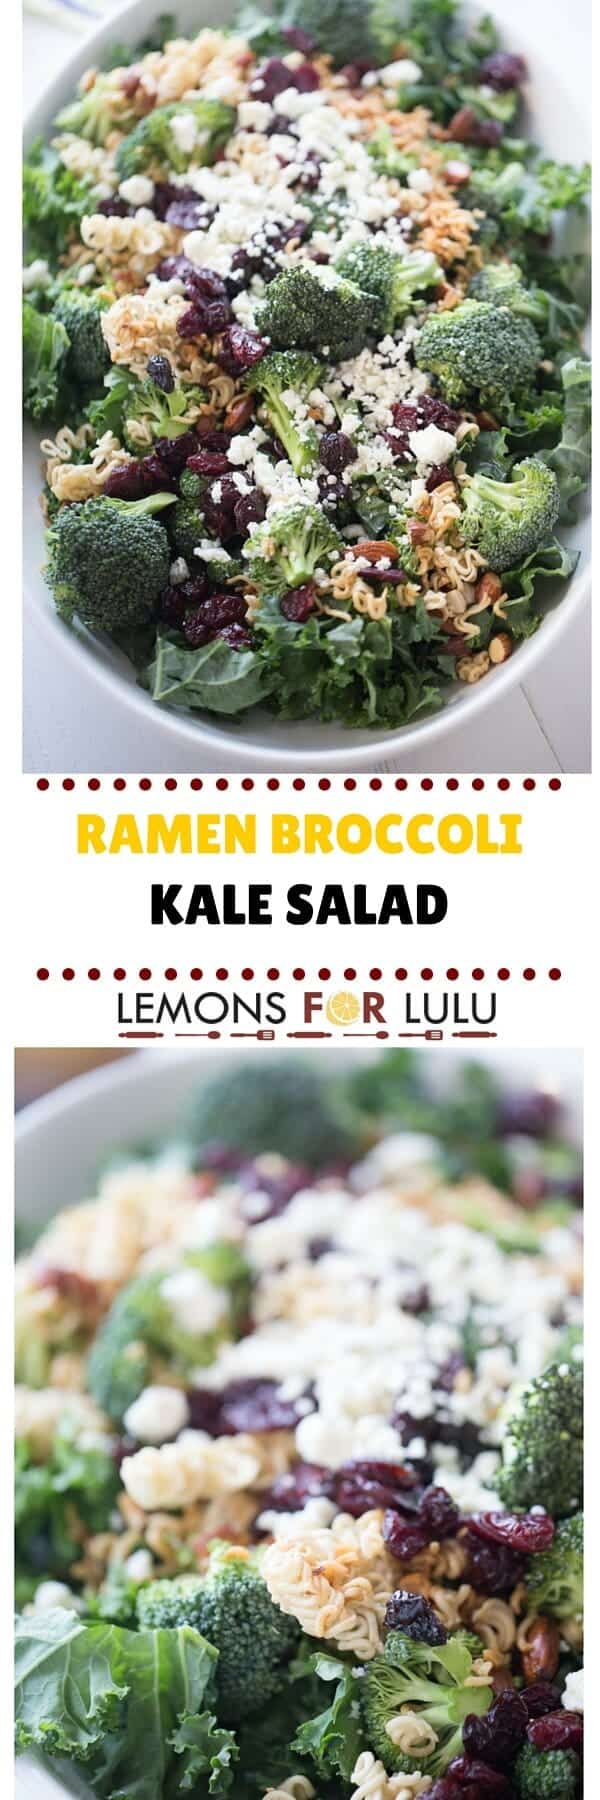  Ramen broccoli salad recipe with krispy kale, sweet cherries, almonds and blue cheese! This is the salad to end all ramen salads!